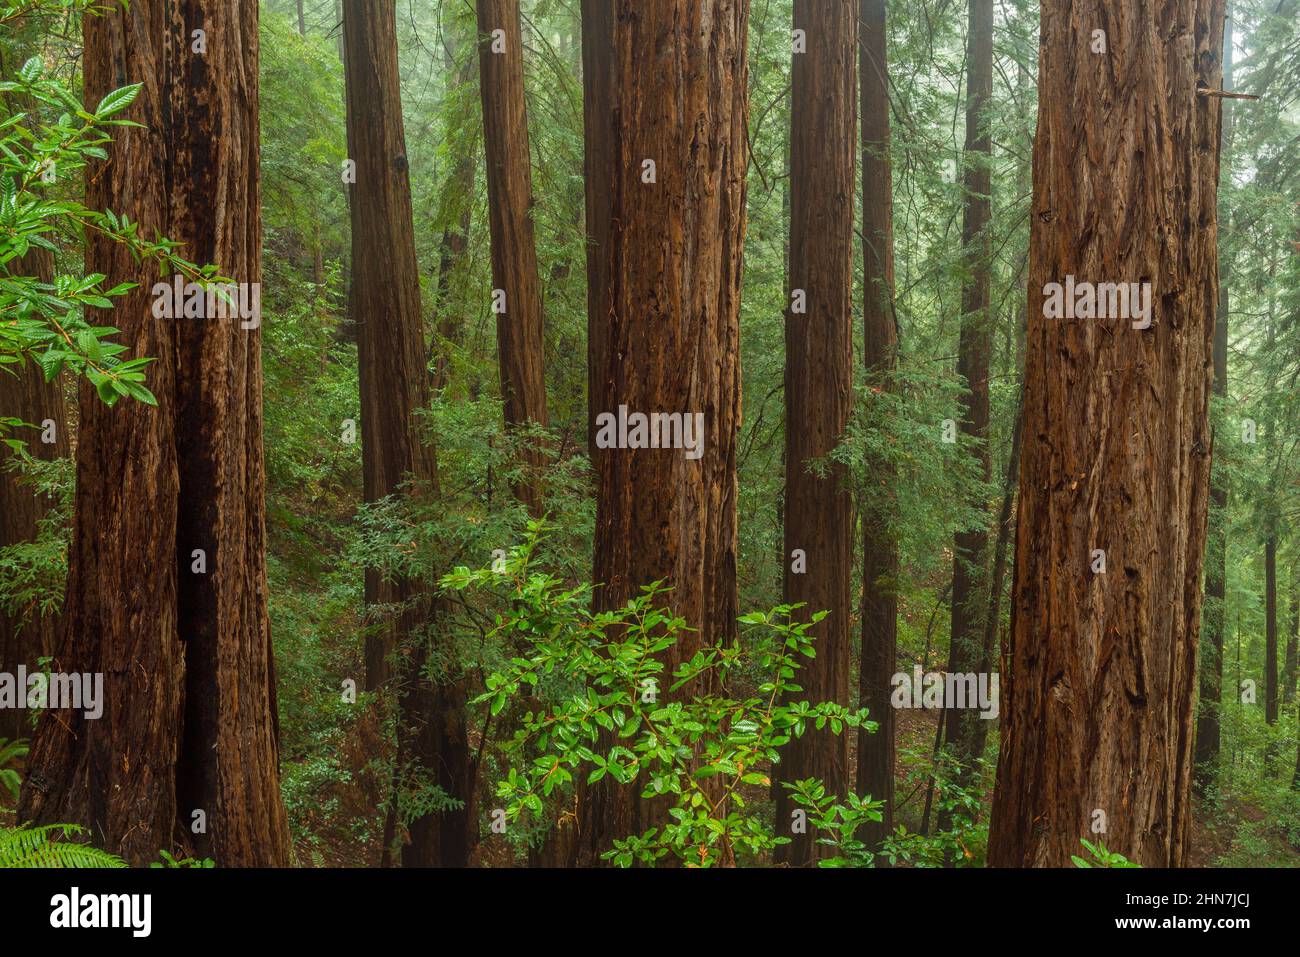 Redwoods, Sequoia sempervirens, Muir Woods National Monument, Marin County, California Stock Photo